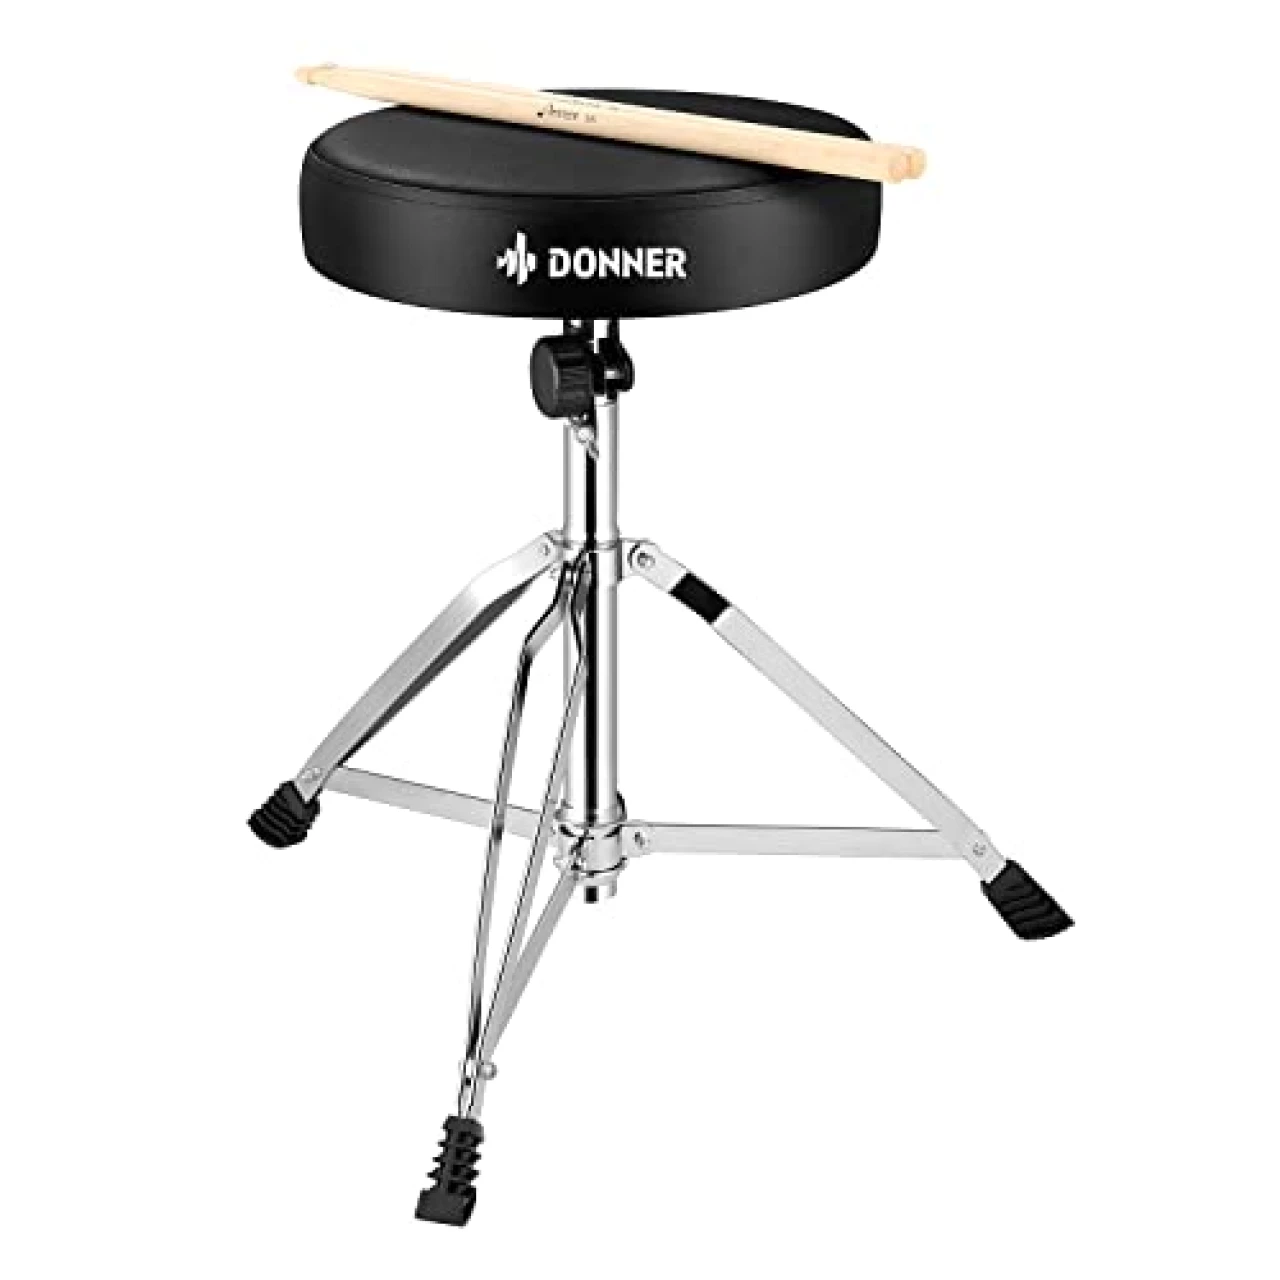 Donner Drum Throne Set, Padded Seat Height Adjustable Drum Stools, 5A Drumsticks Included